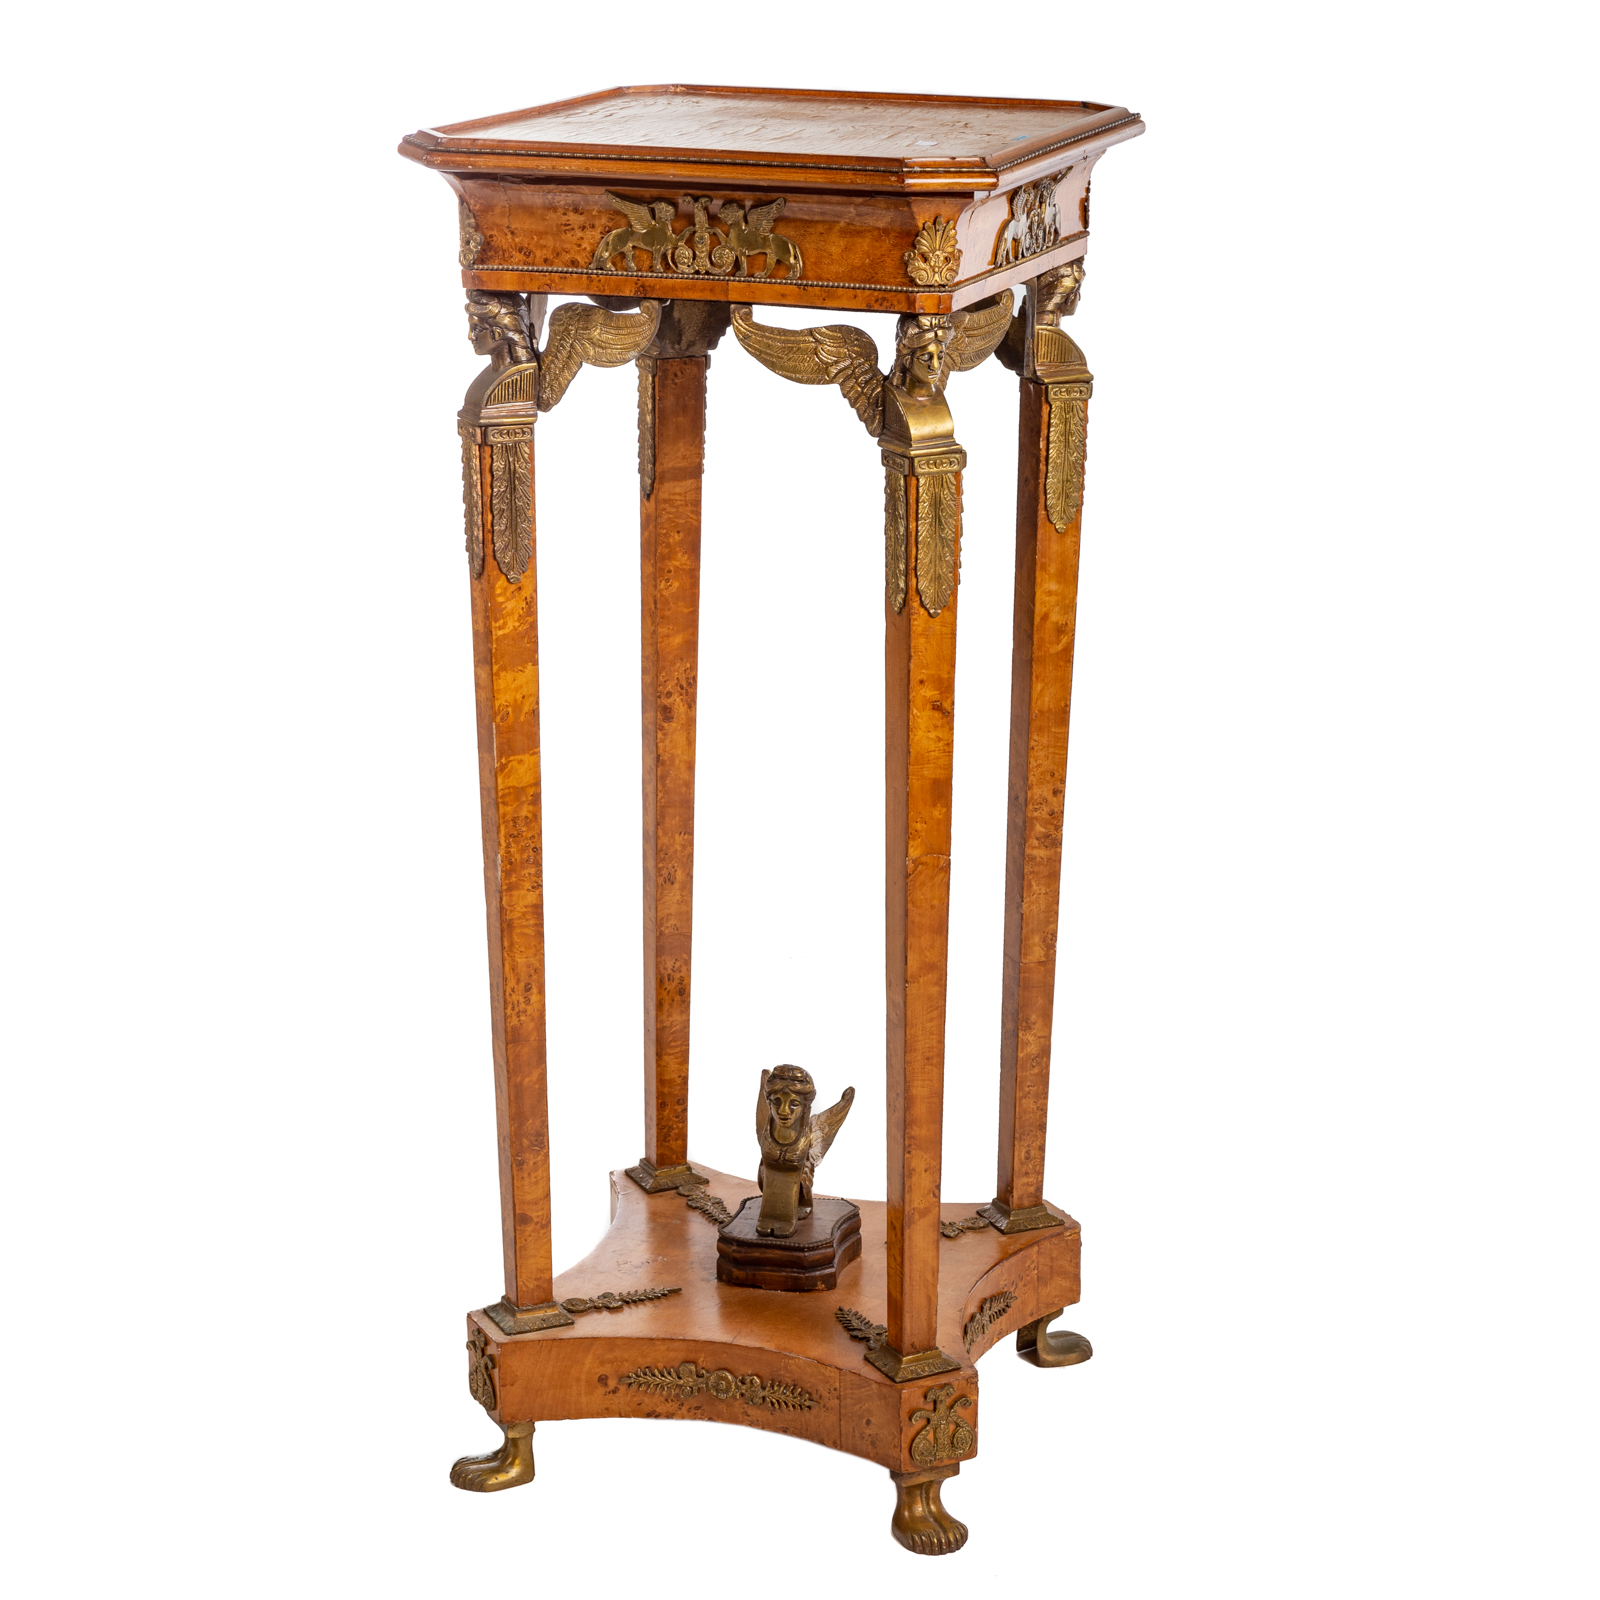 FRENCH EMPIRE STYLE FERN STAND PEDESTAL 369827